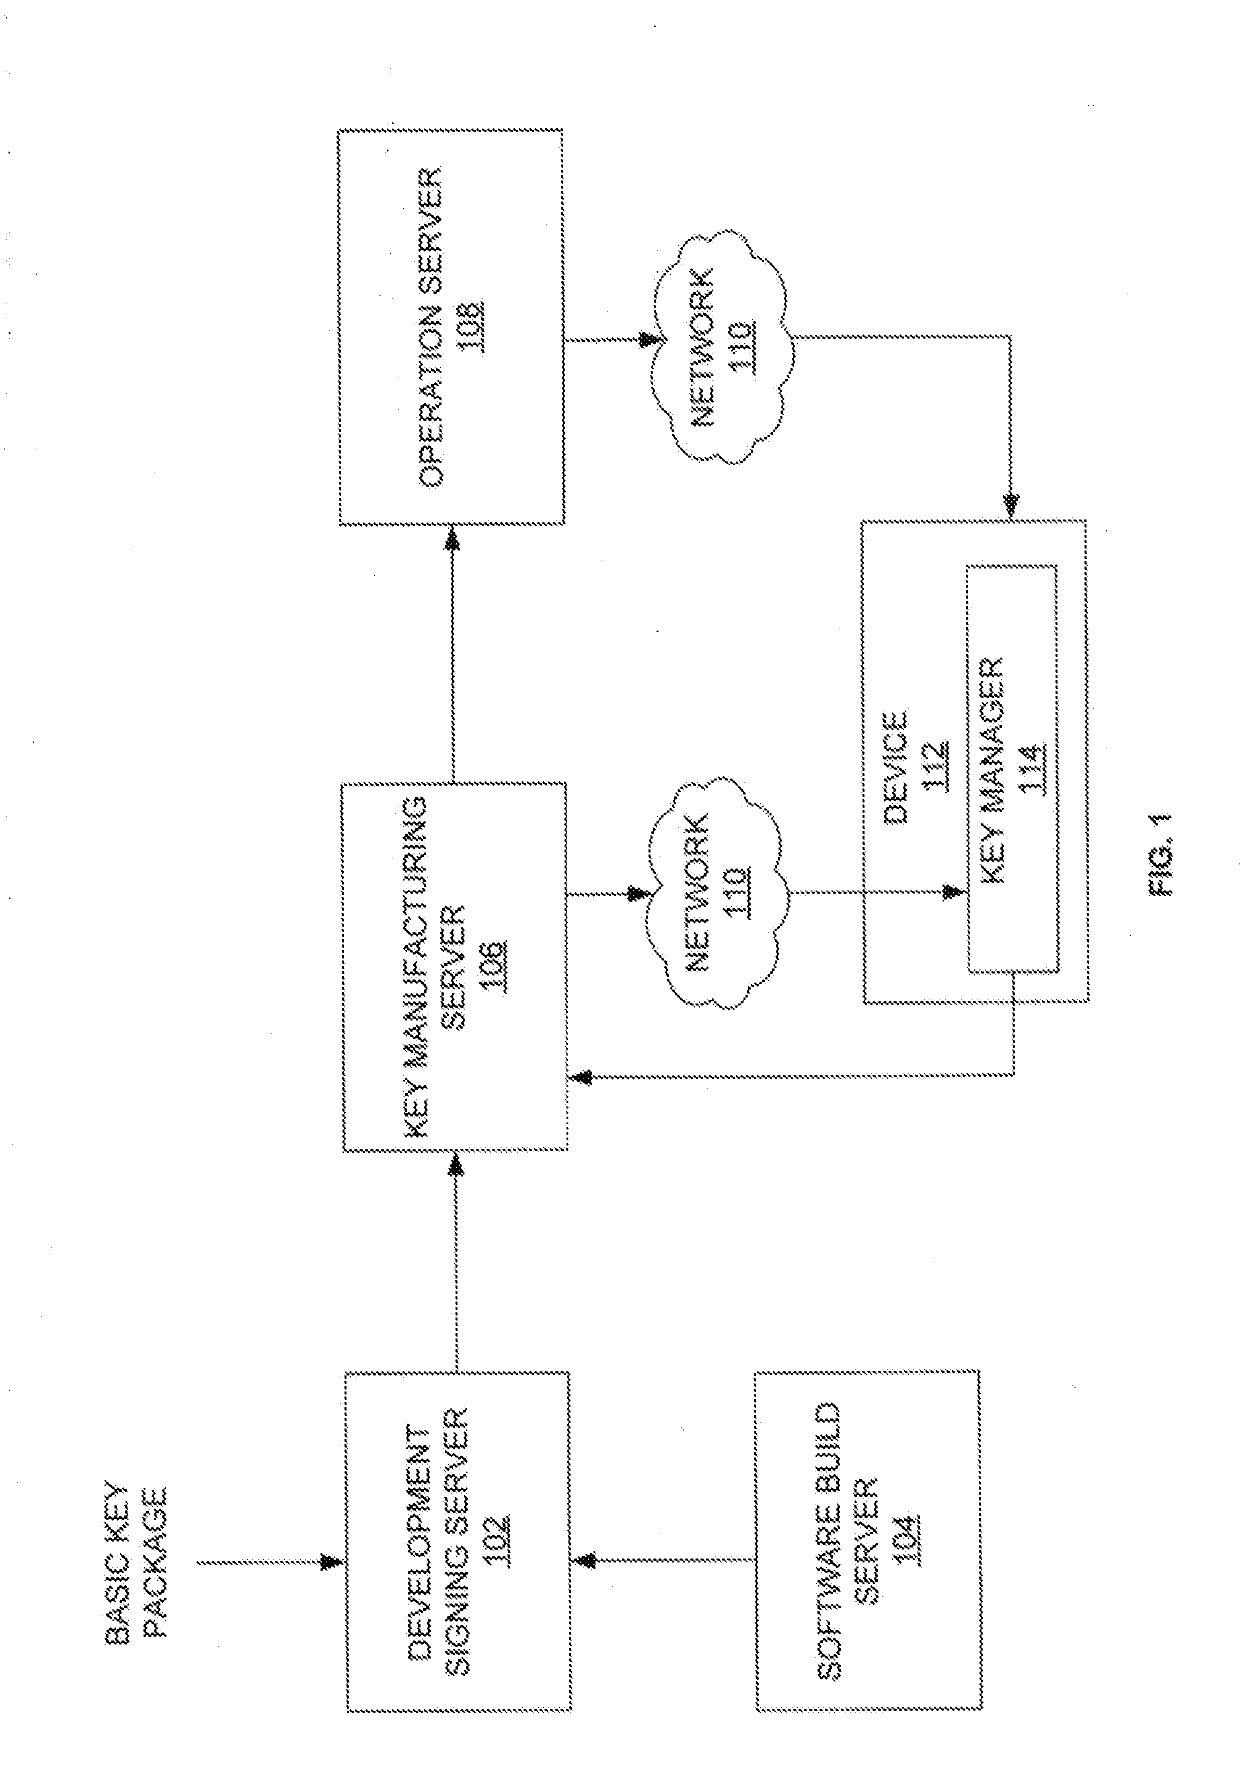 System and method for generating and managing a key package